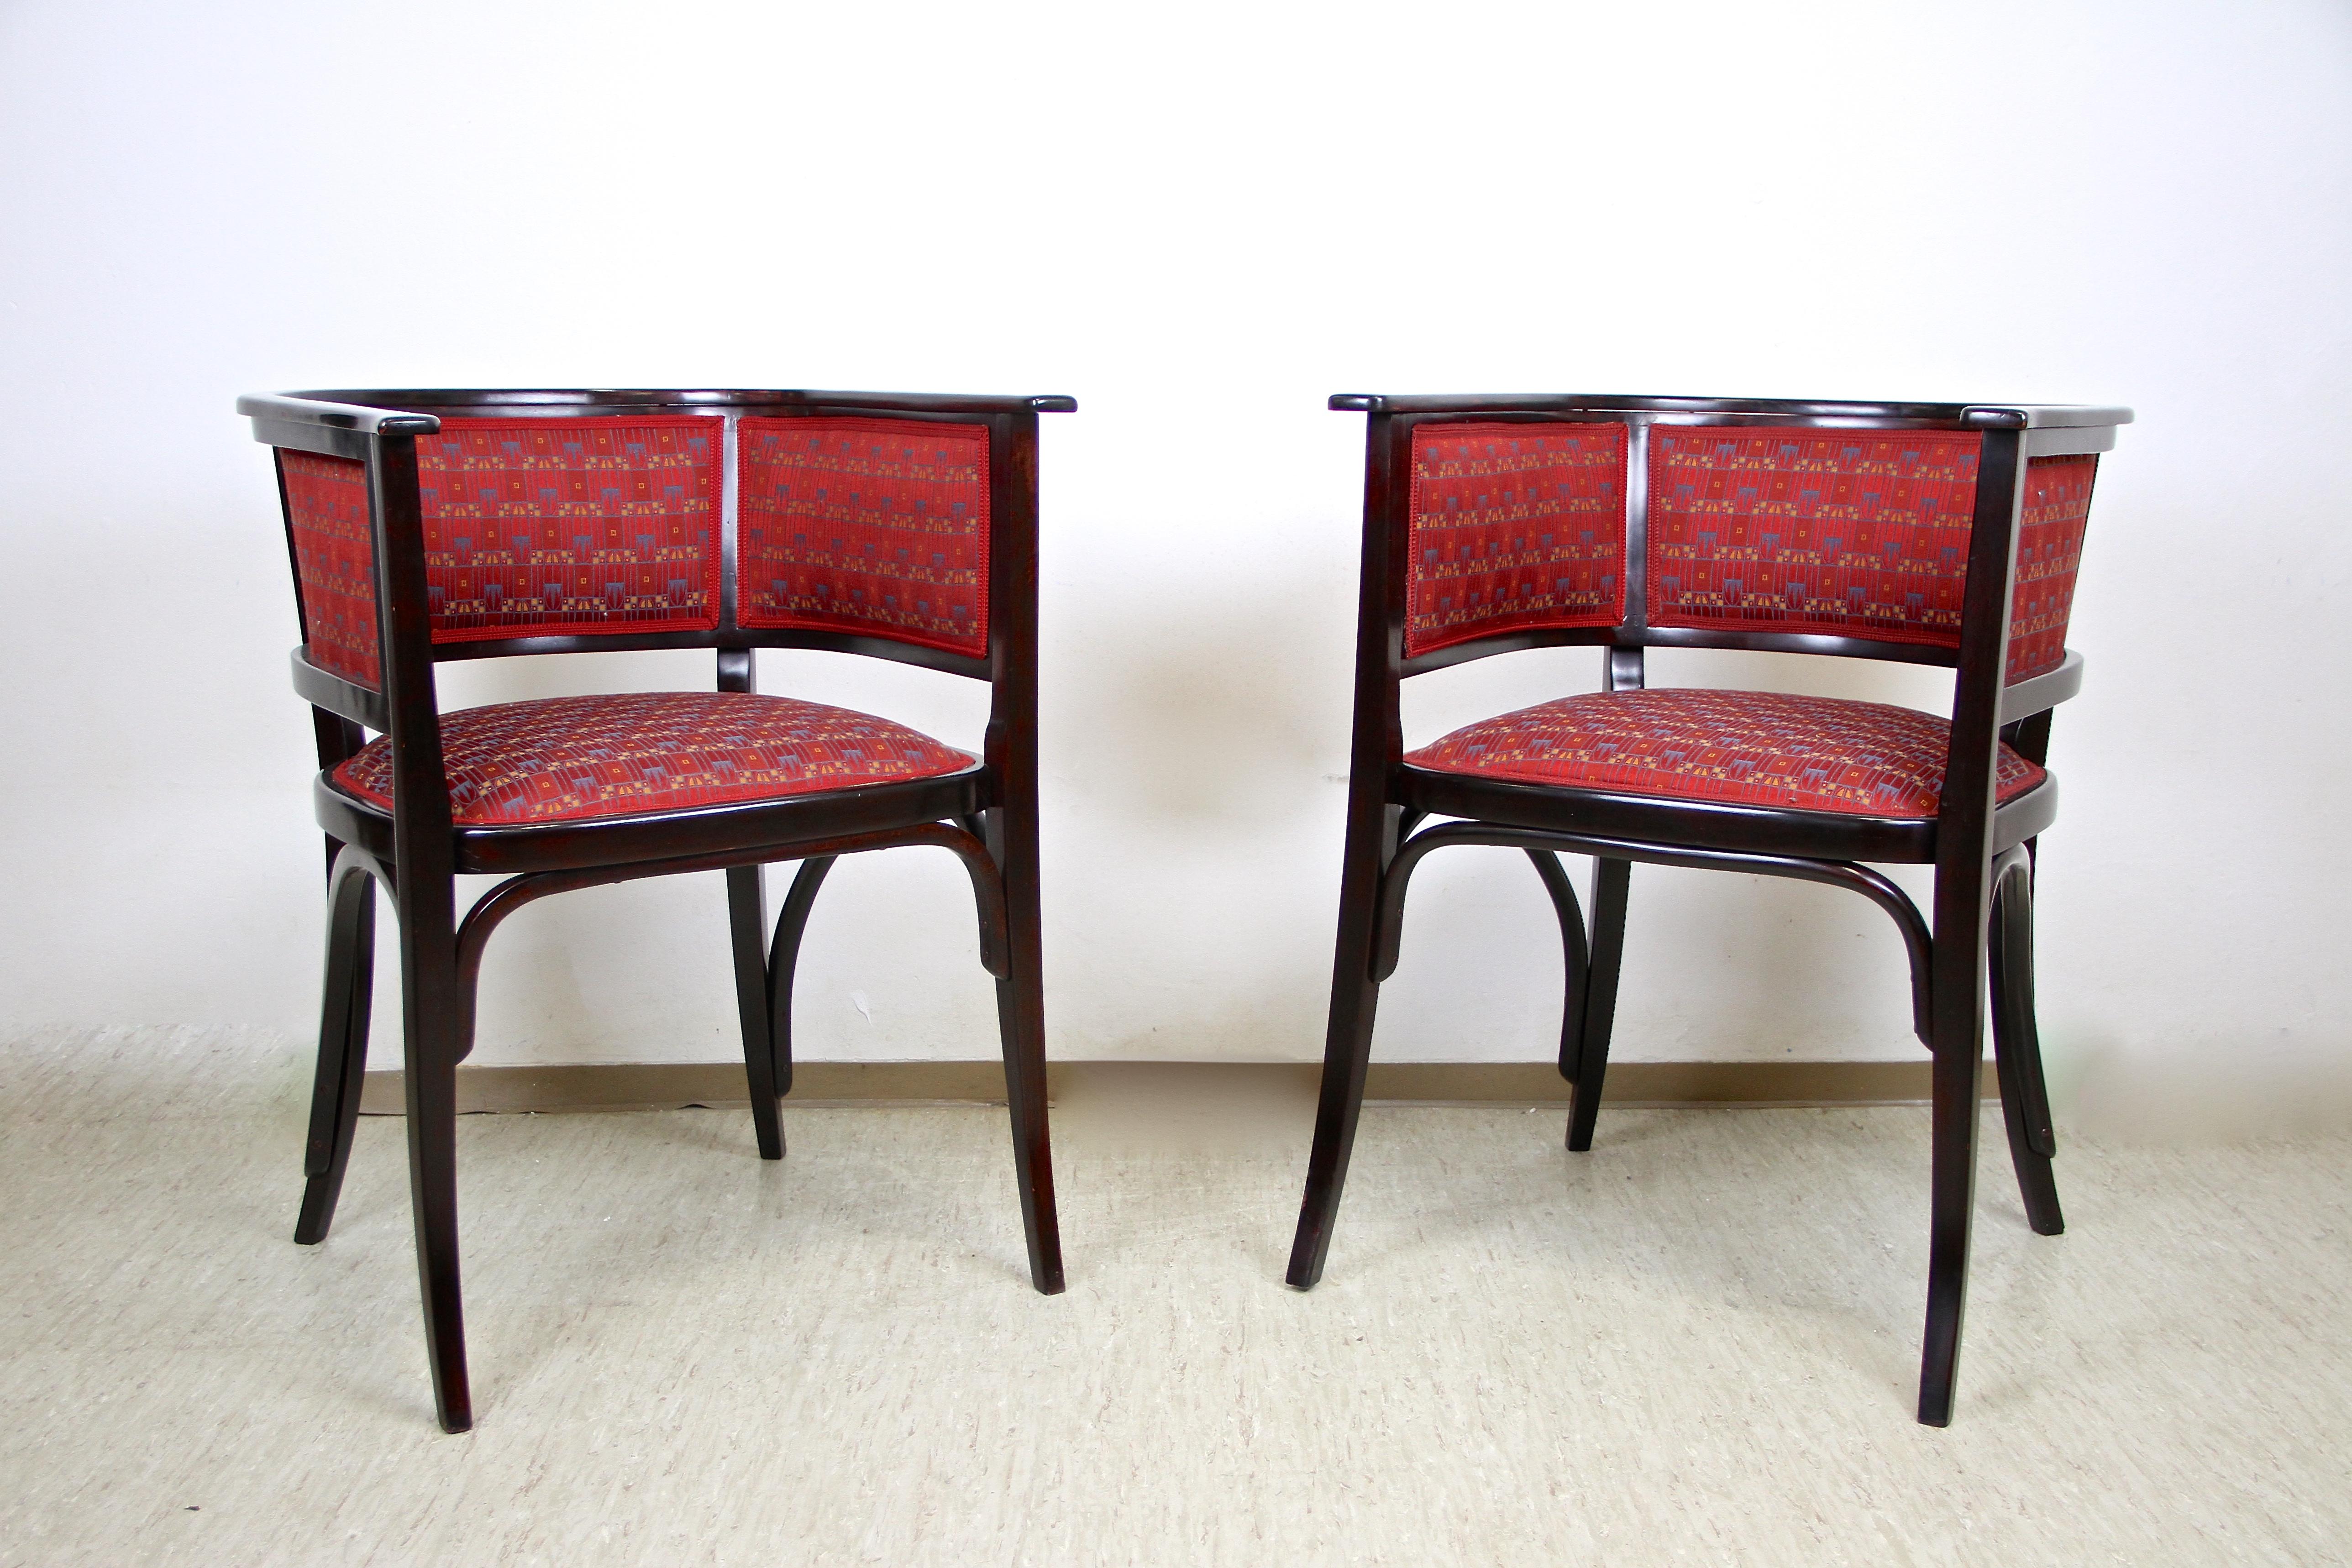 Thonet Bentwood Seating Set with Two Armchairs and Bench, Austria, circa 1910 6